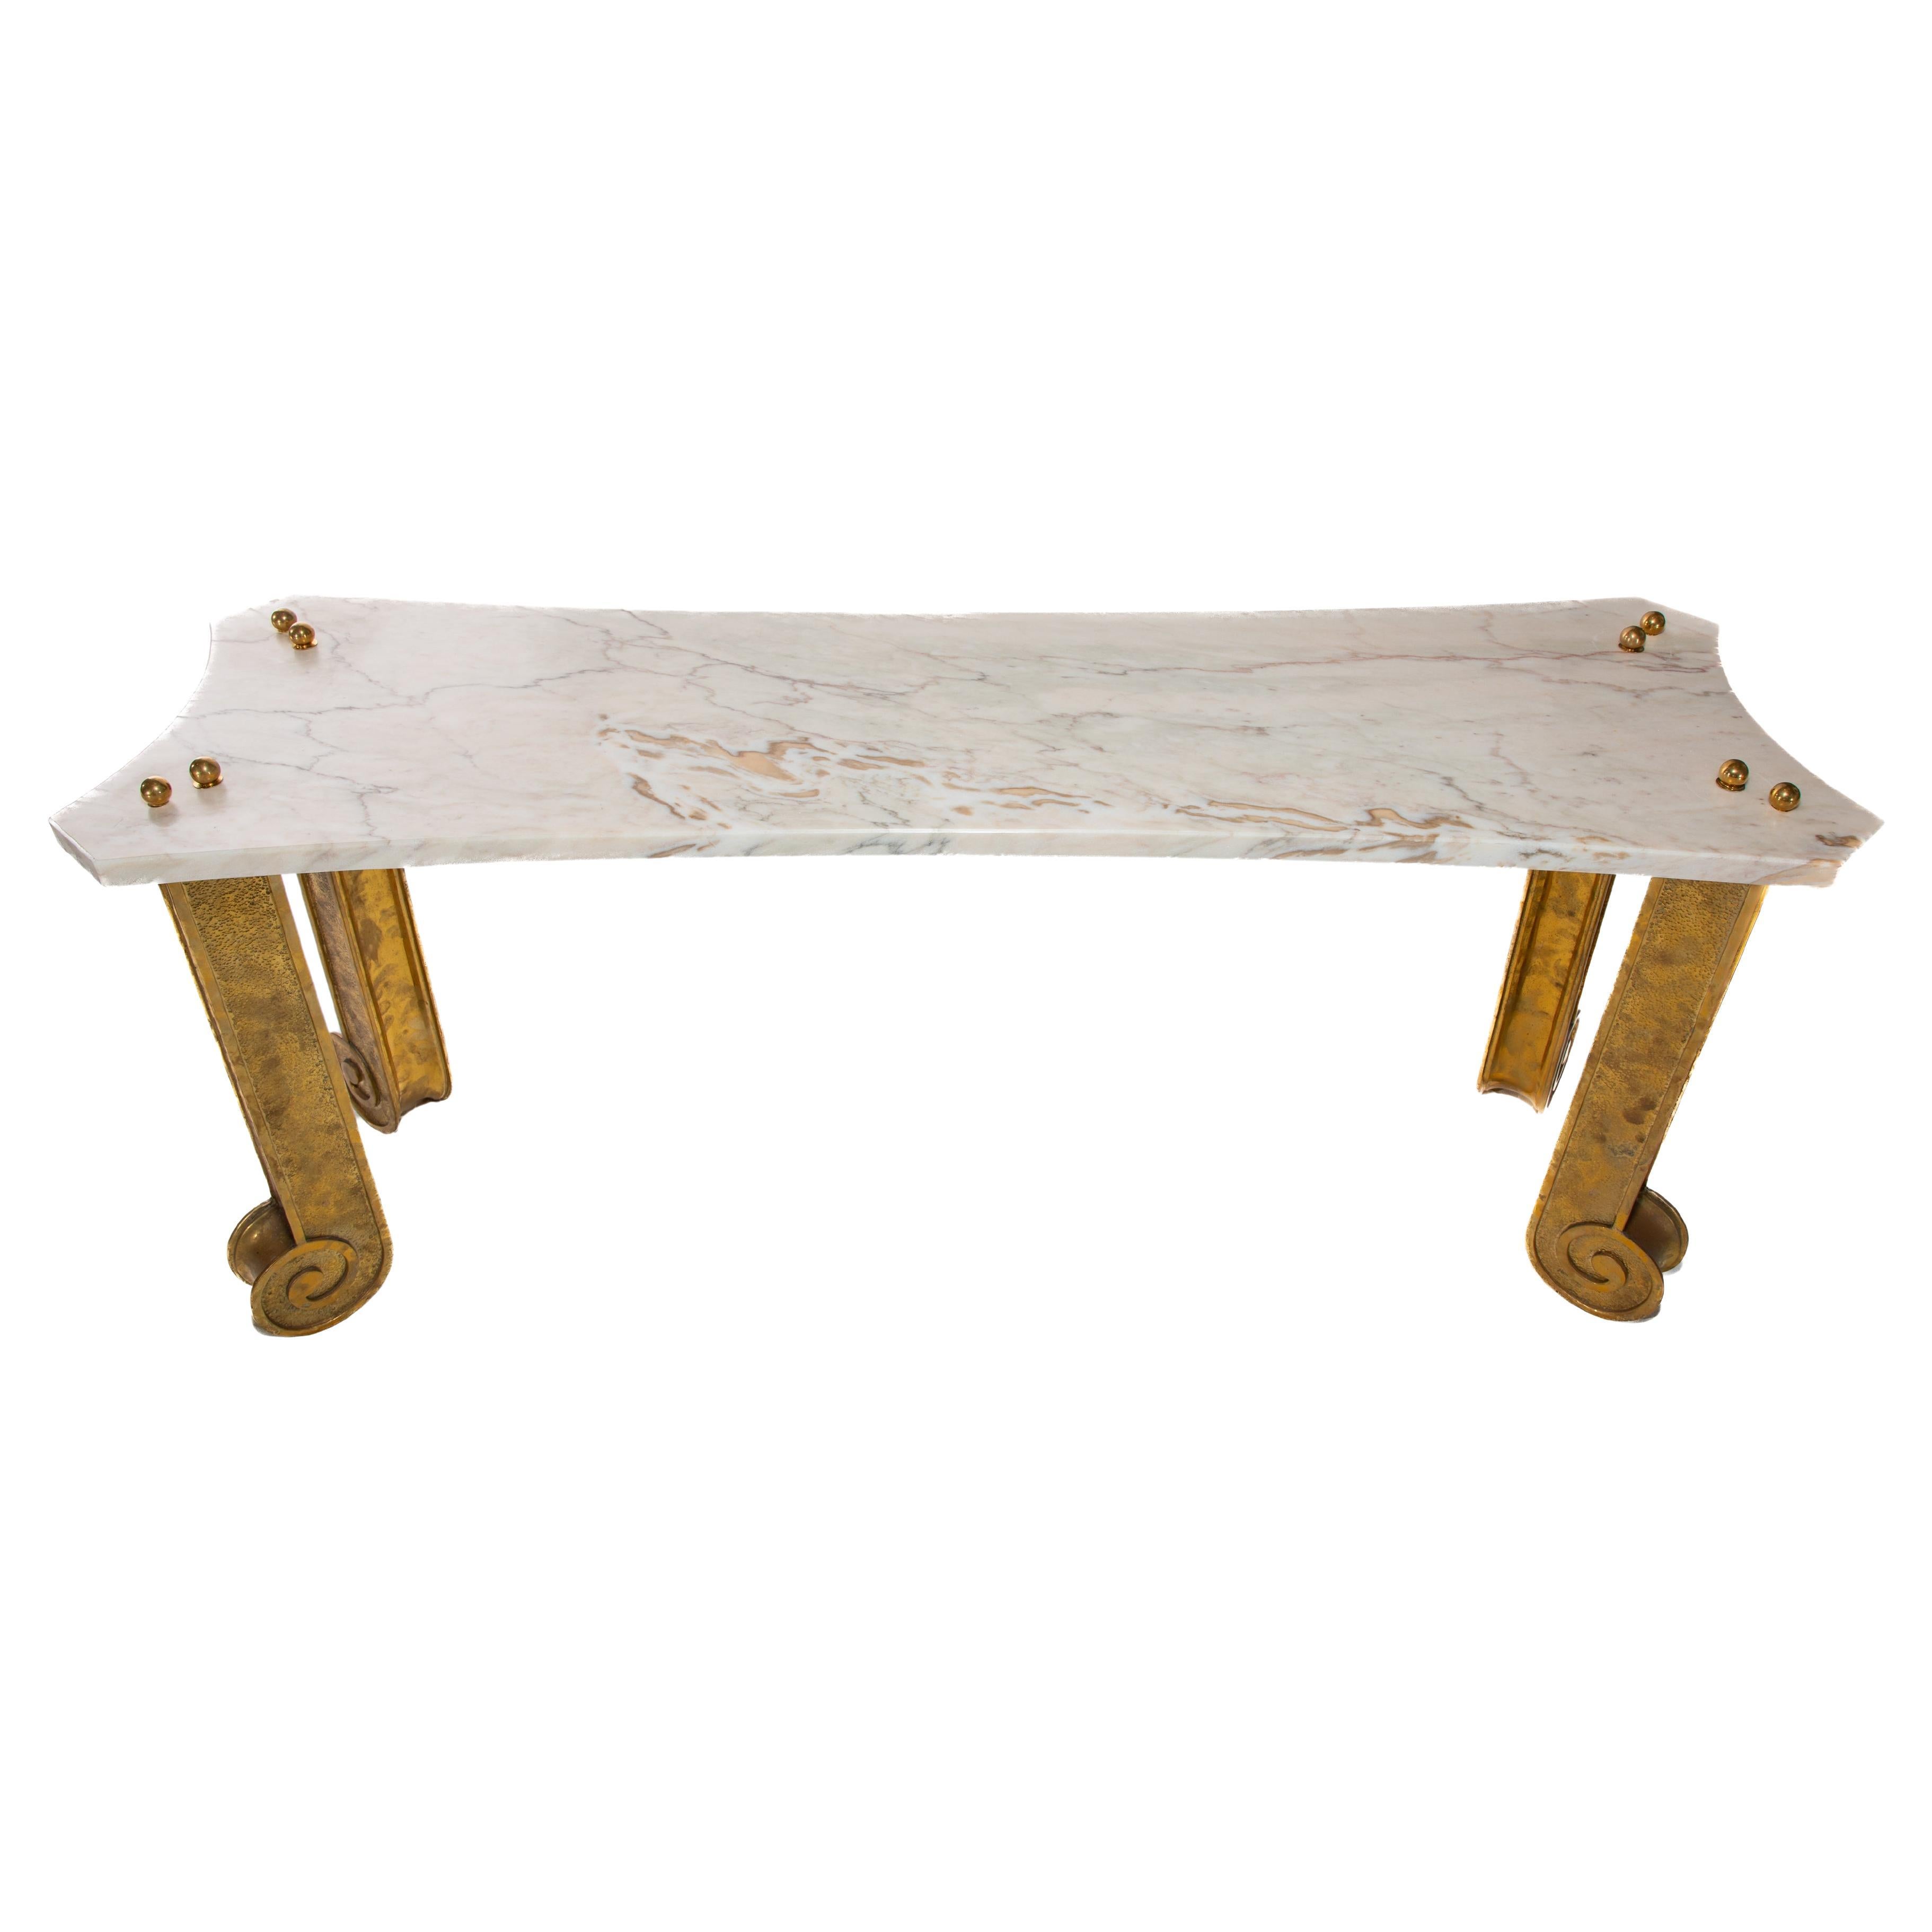 Stunning Art Deco Gilt Bronze Console Table with Marble Top For Sale